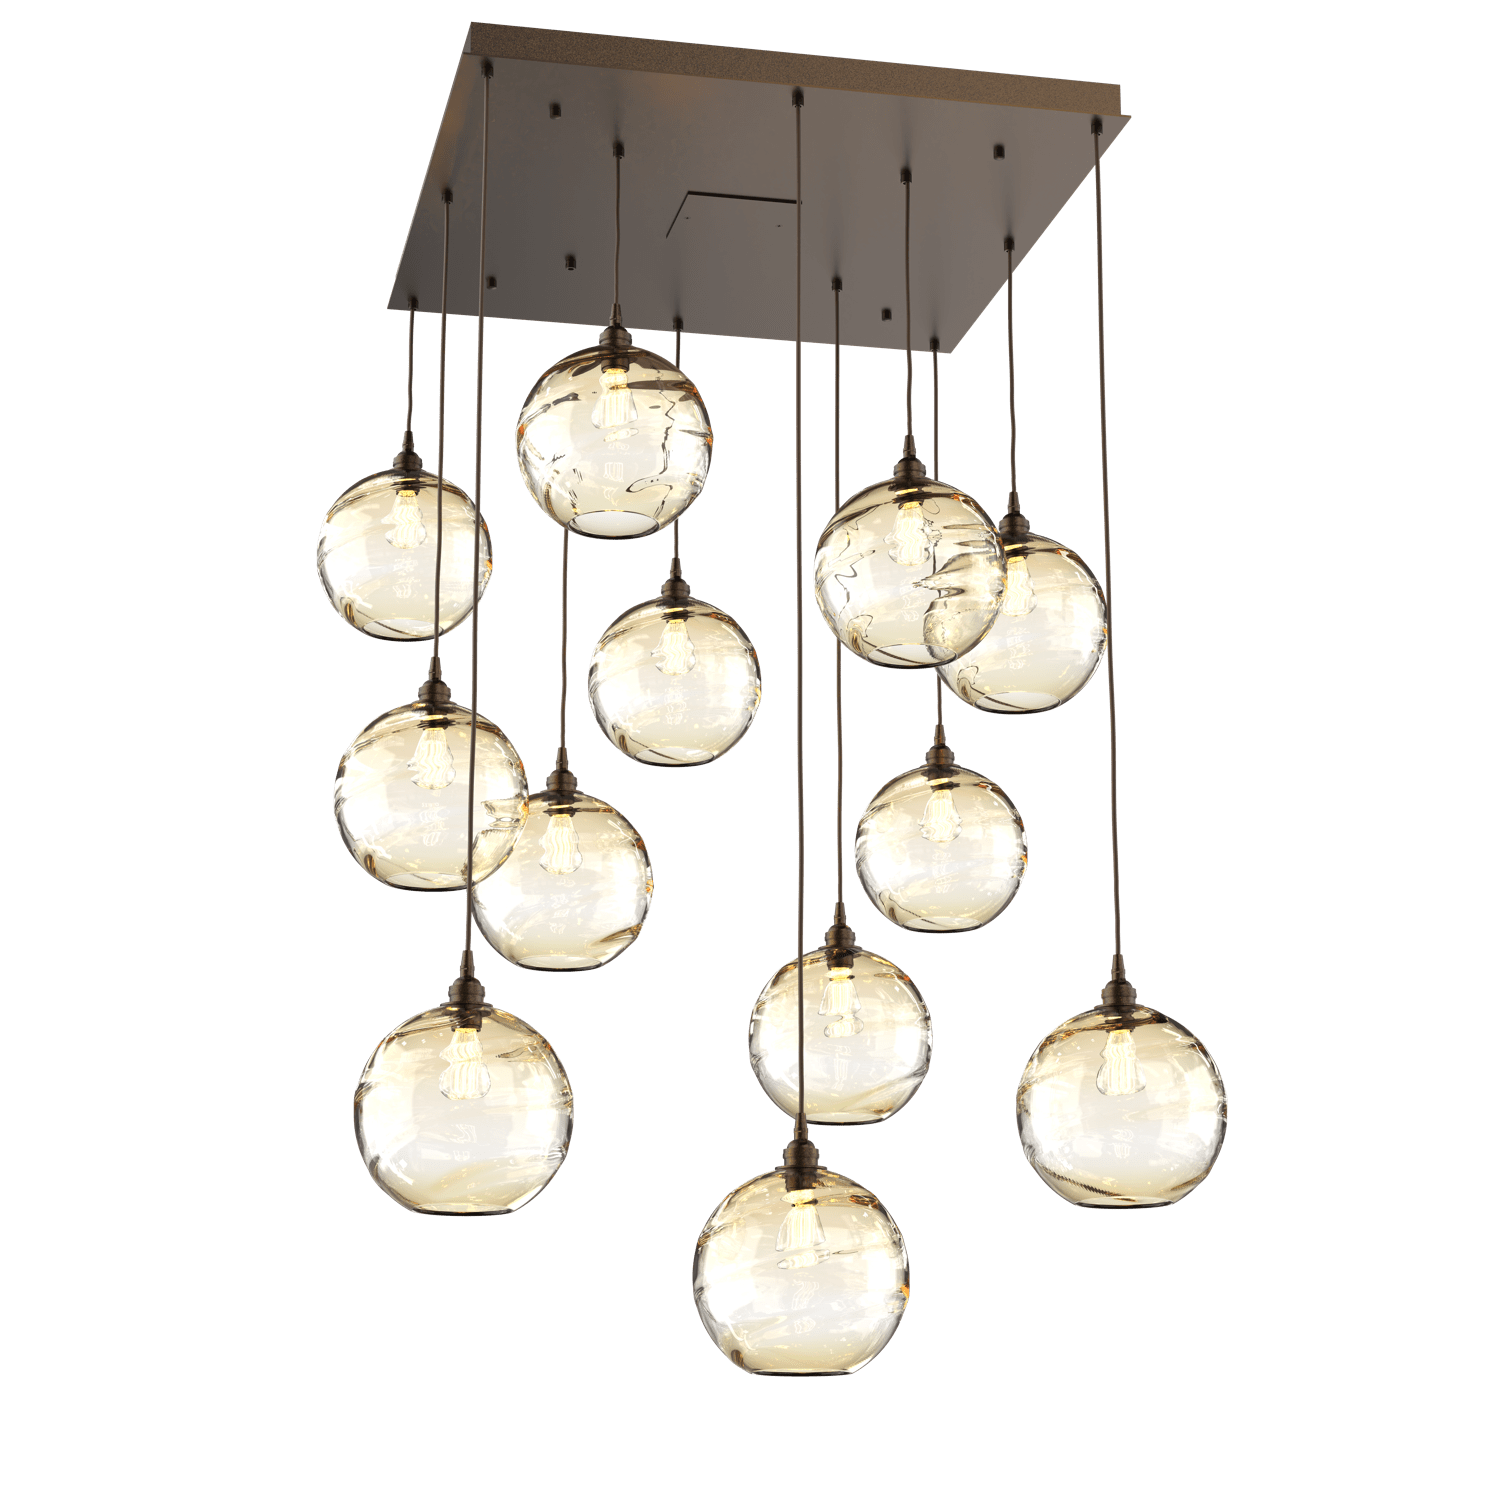 CHB0047-12-FB-OA-Hammerton-Studio-Optic-Blown-Glass-Terra-12-light-square-pendant-chandelier-with-flat-bronze-finish-and-optic-amber-blown-glass-shades-and-incandescent-lamping